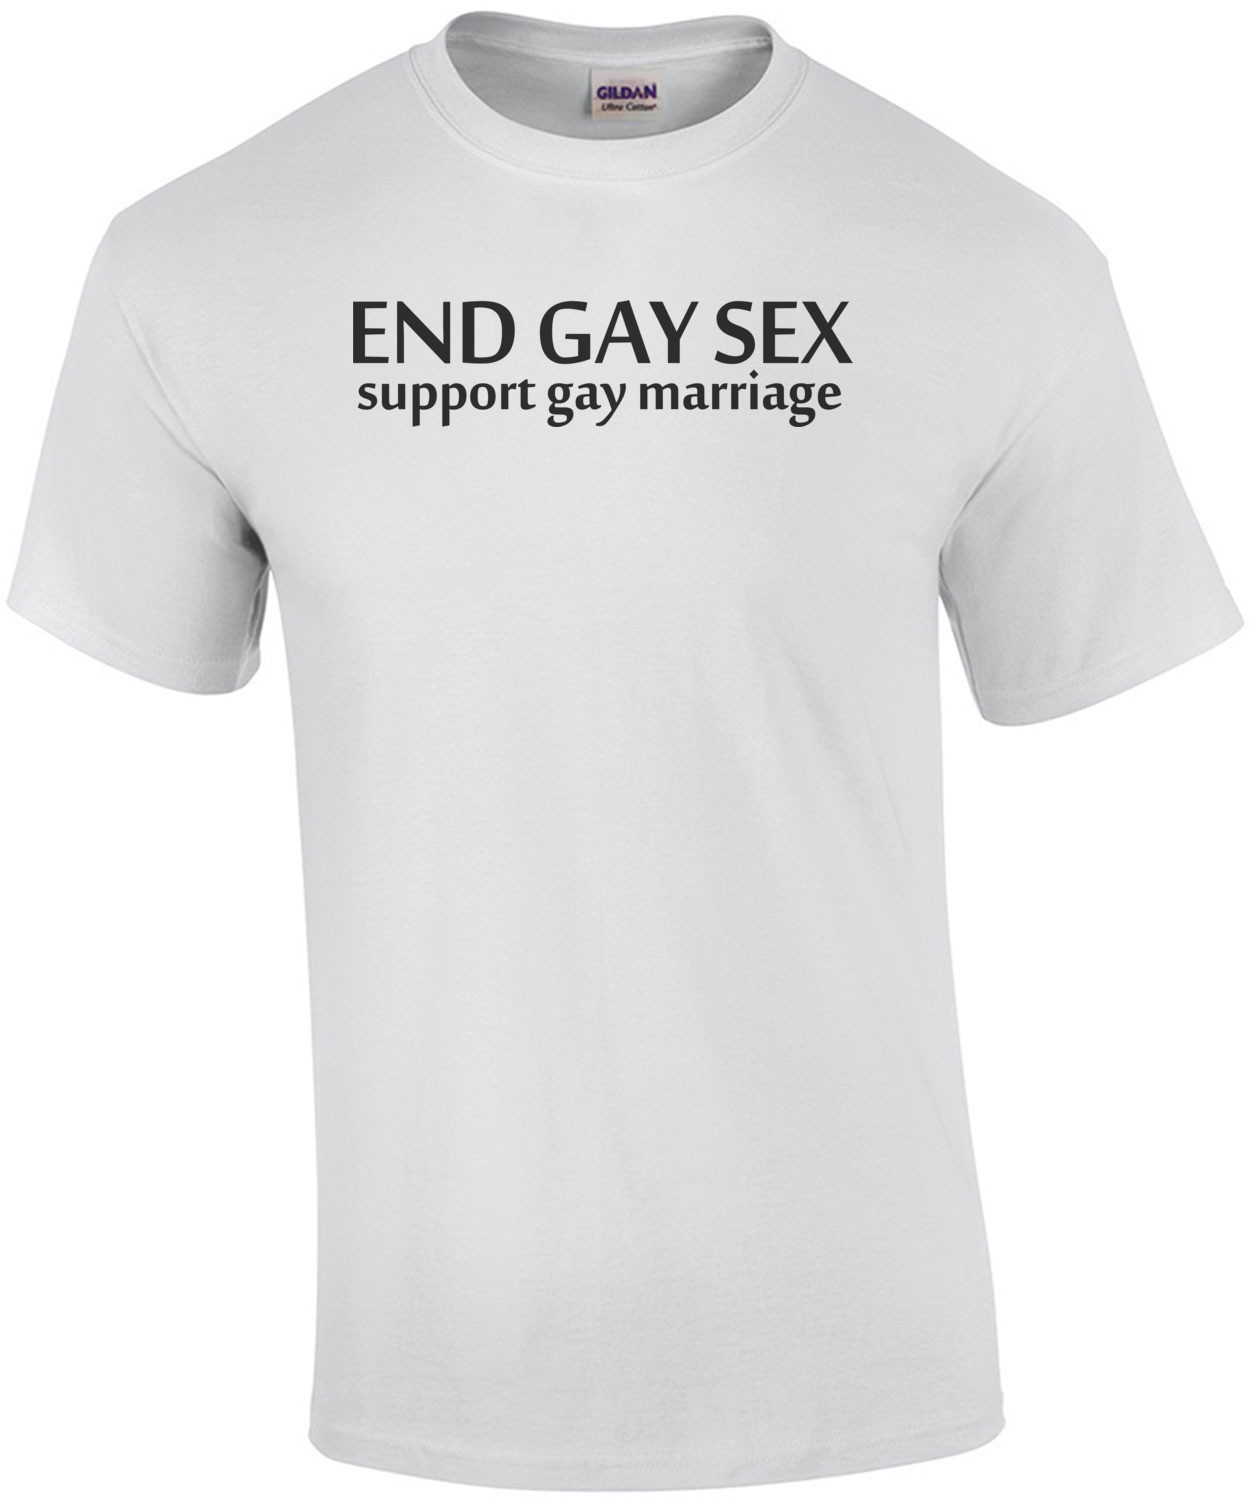 End Gay Sex, Support Gay Marriage Shirt